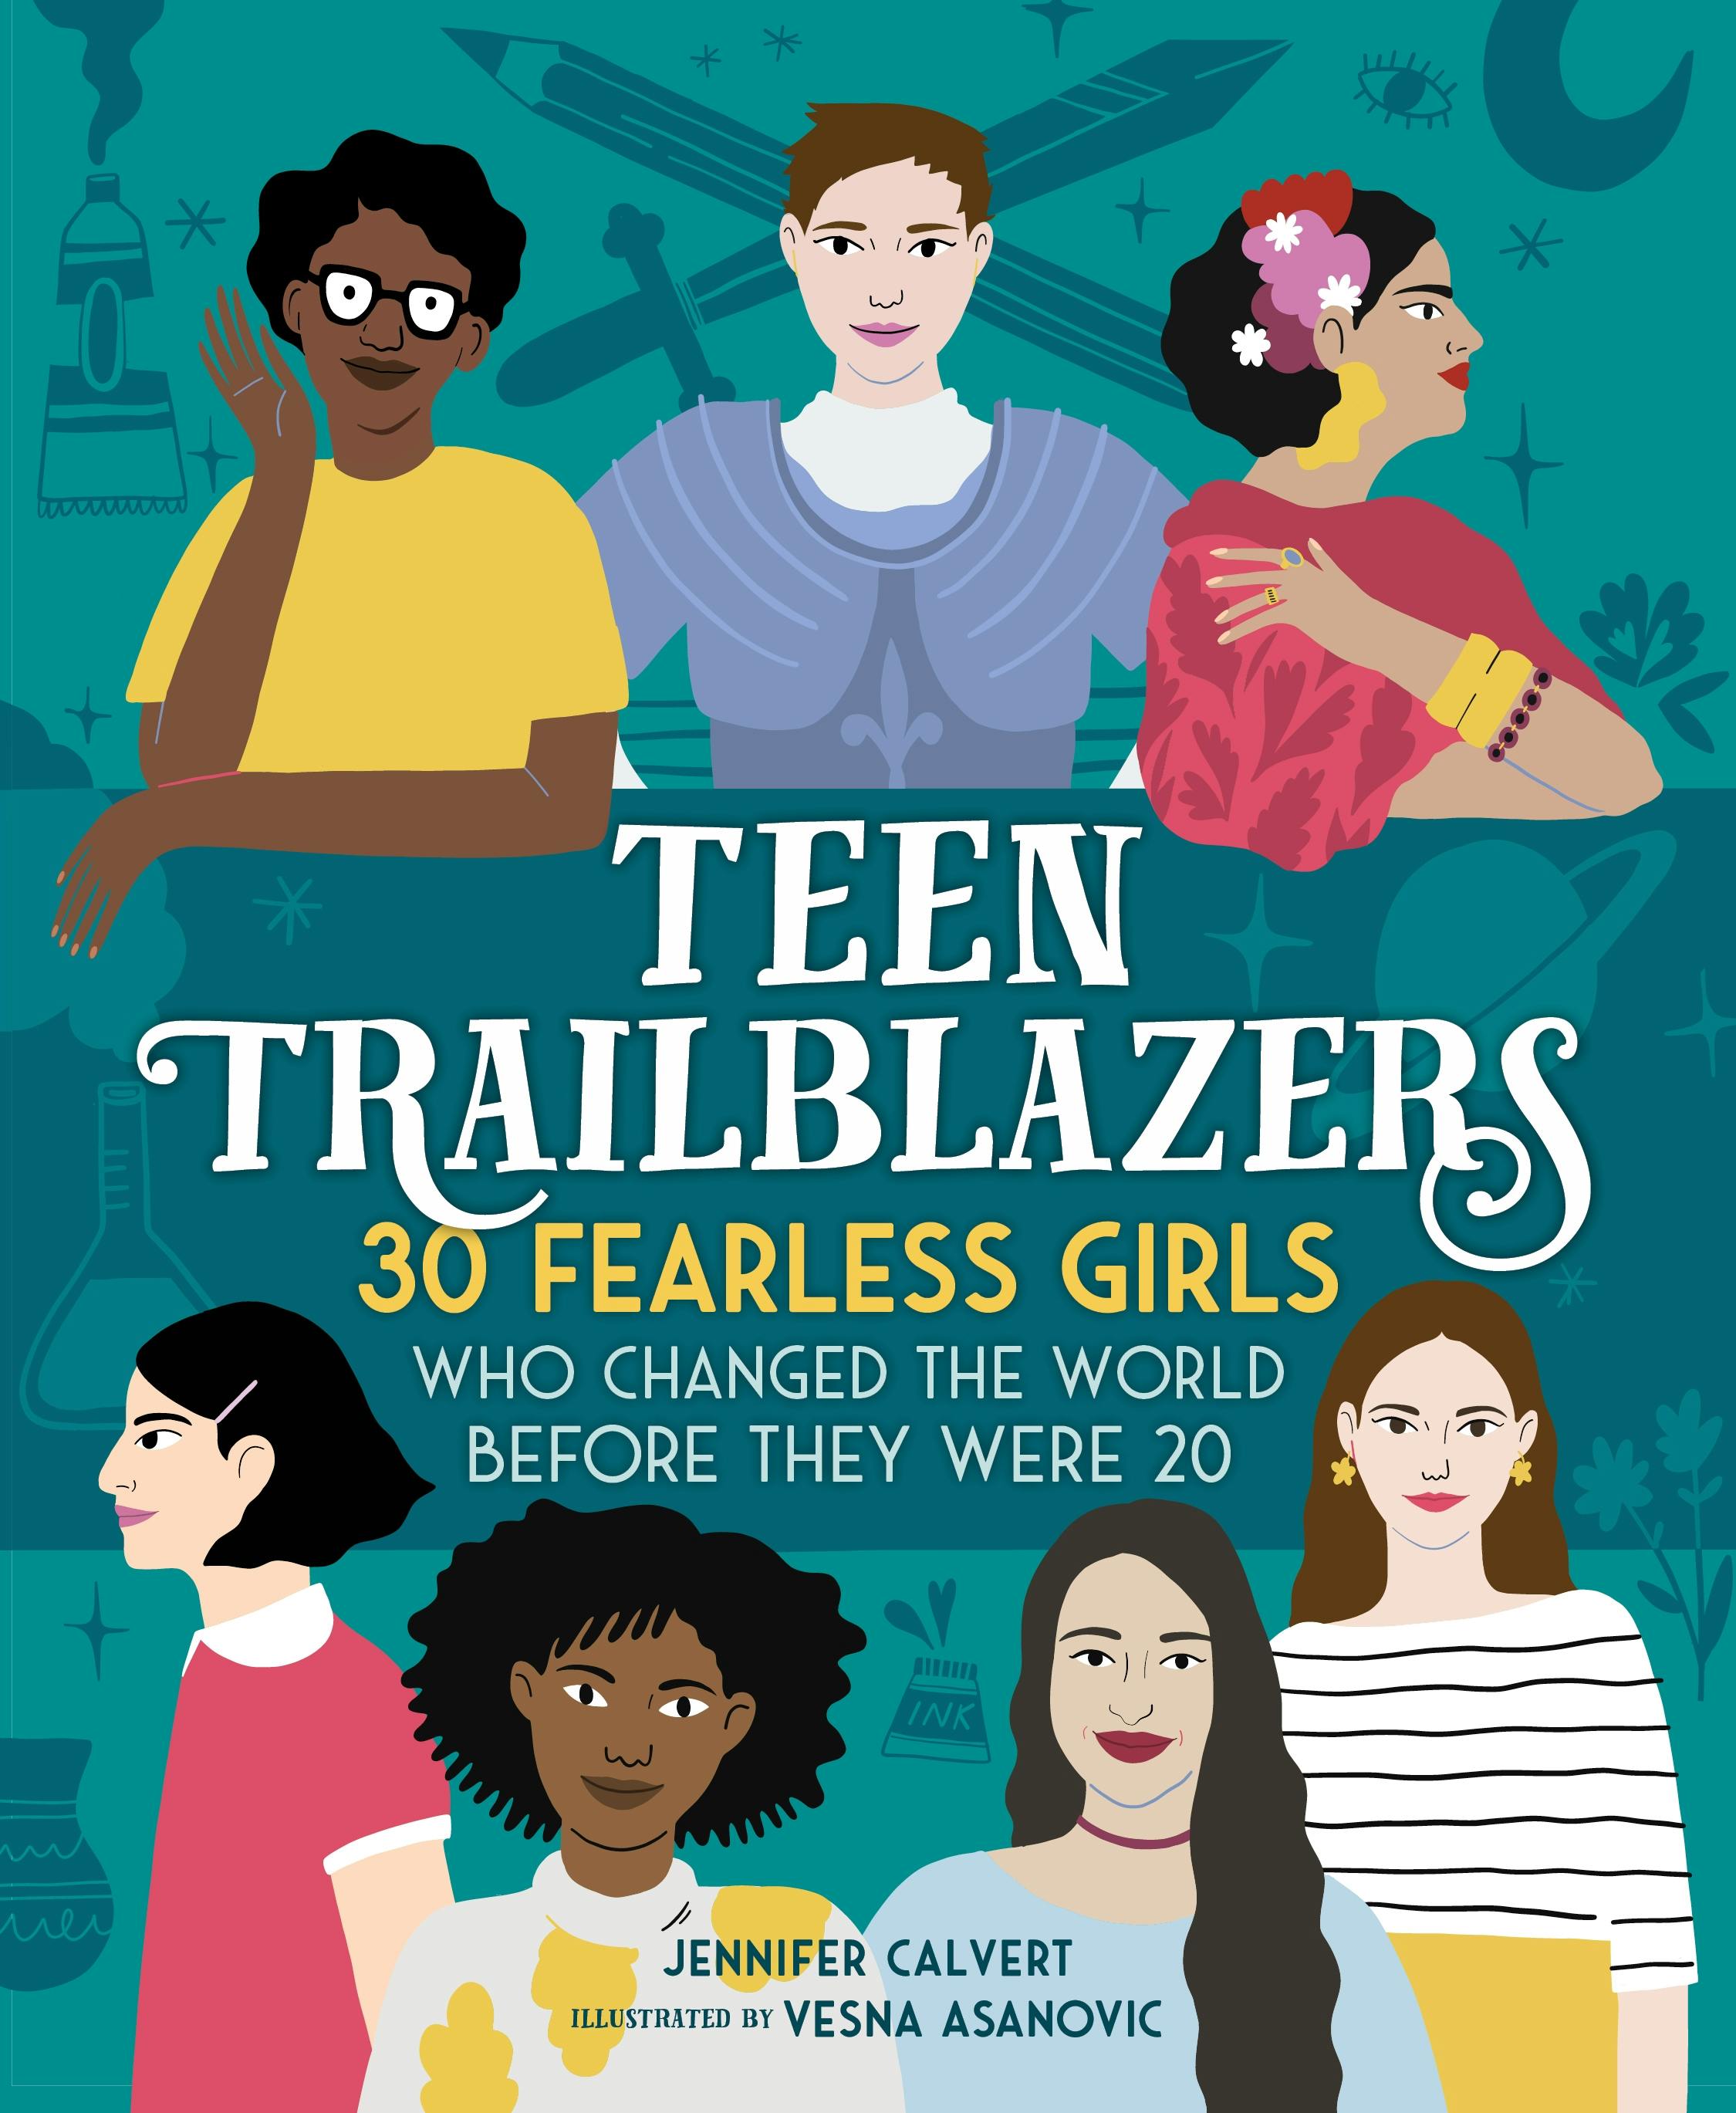 17 books for kids about inspiring women who changed the world – I